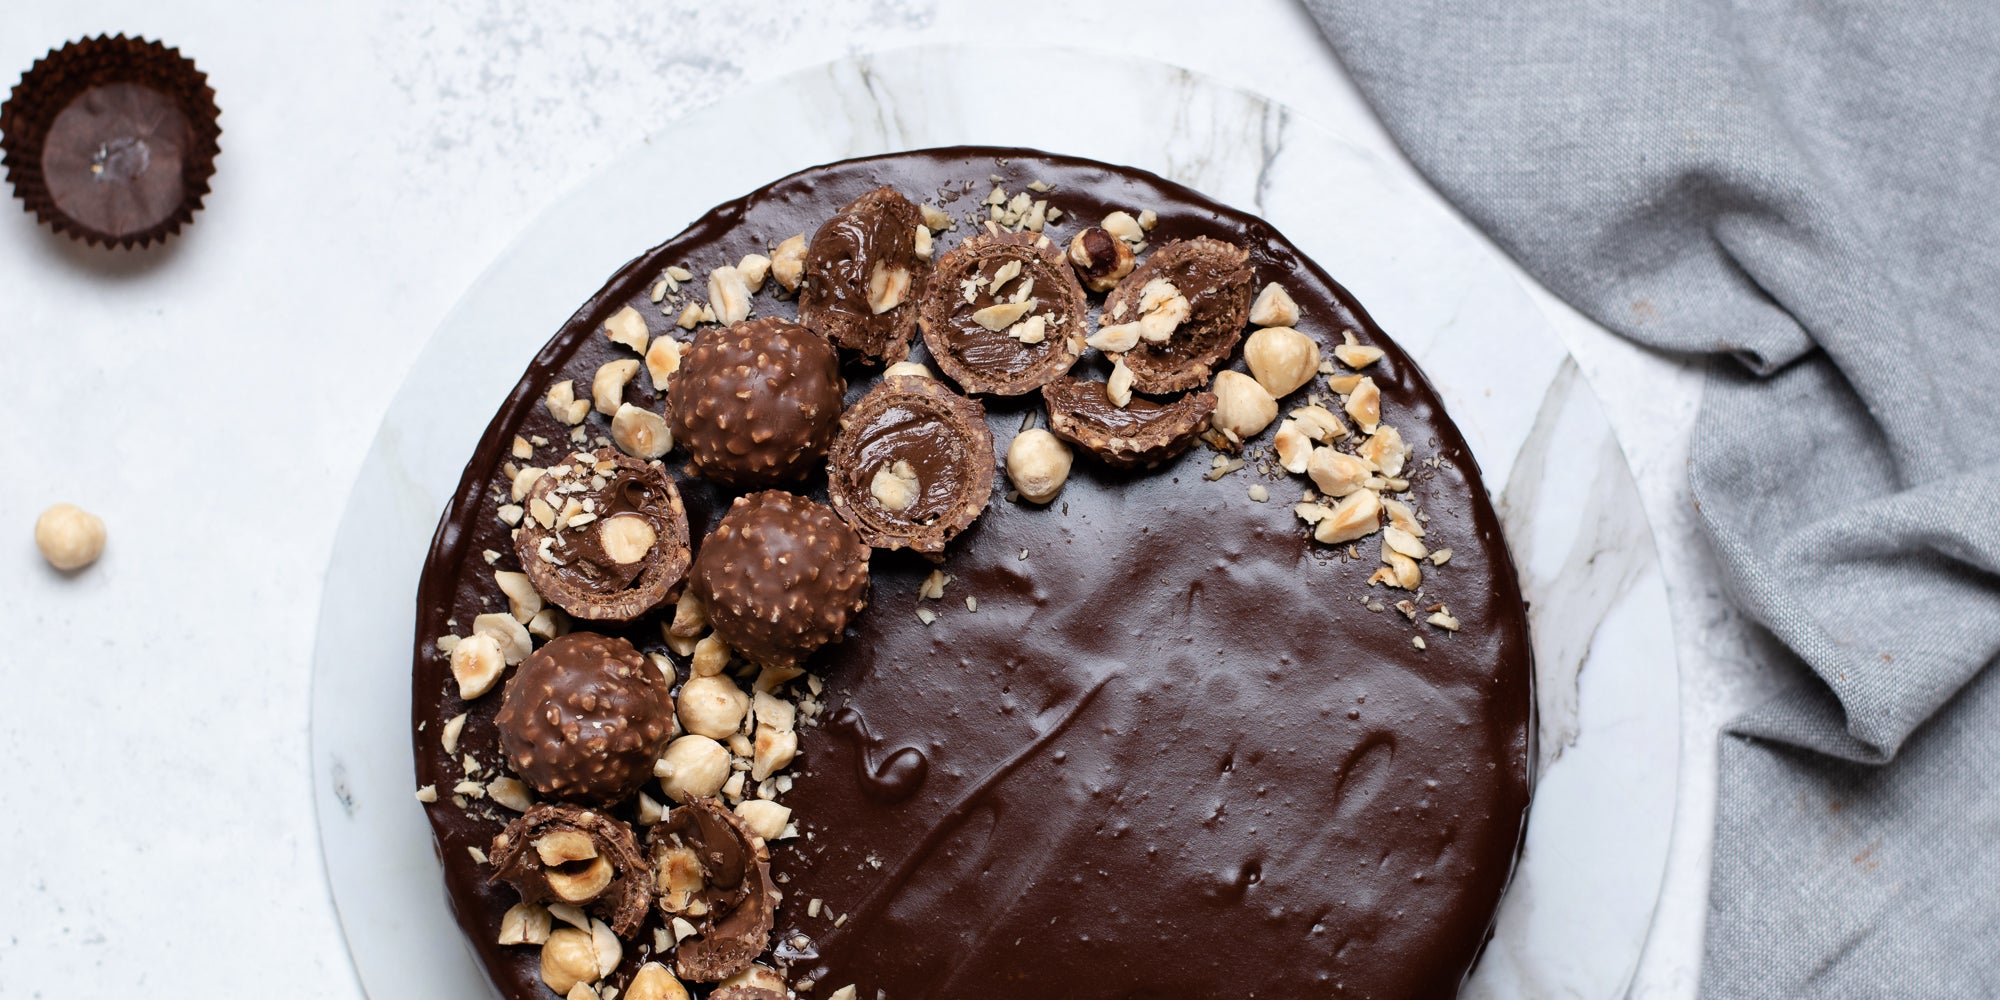 Top view of Gluten Free Chocolate Truffle Sachertorte, smothered in chocolate icing, decorated with Ferrero Rocher's and chopped hazelnuts on a marble serving plate